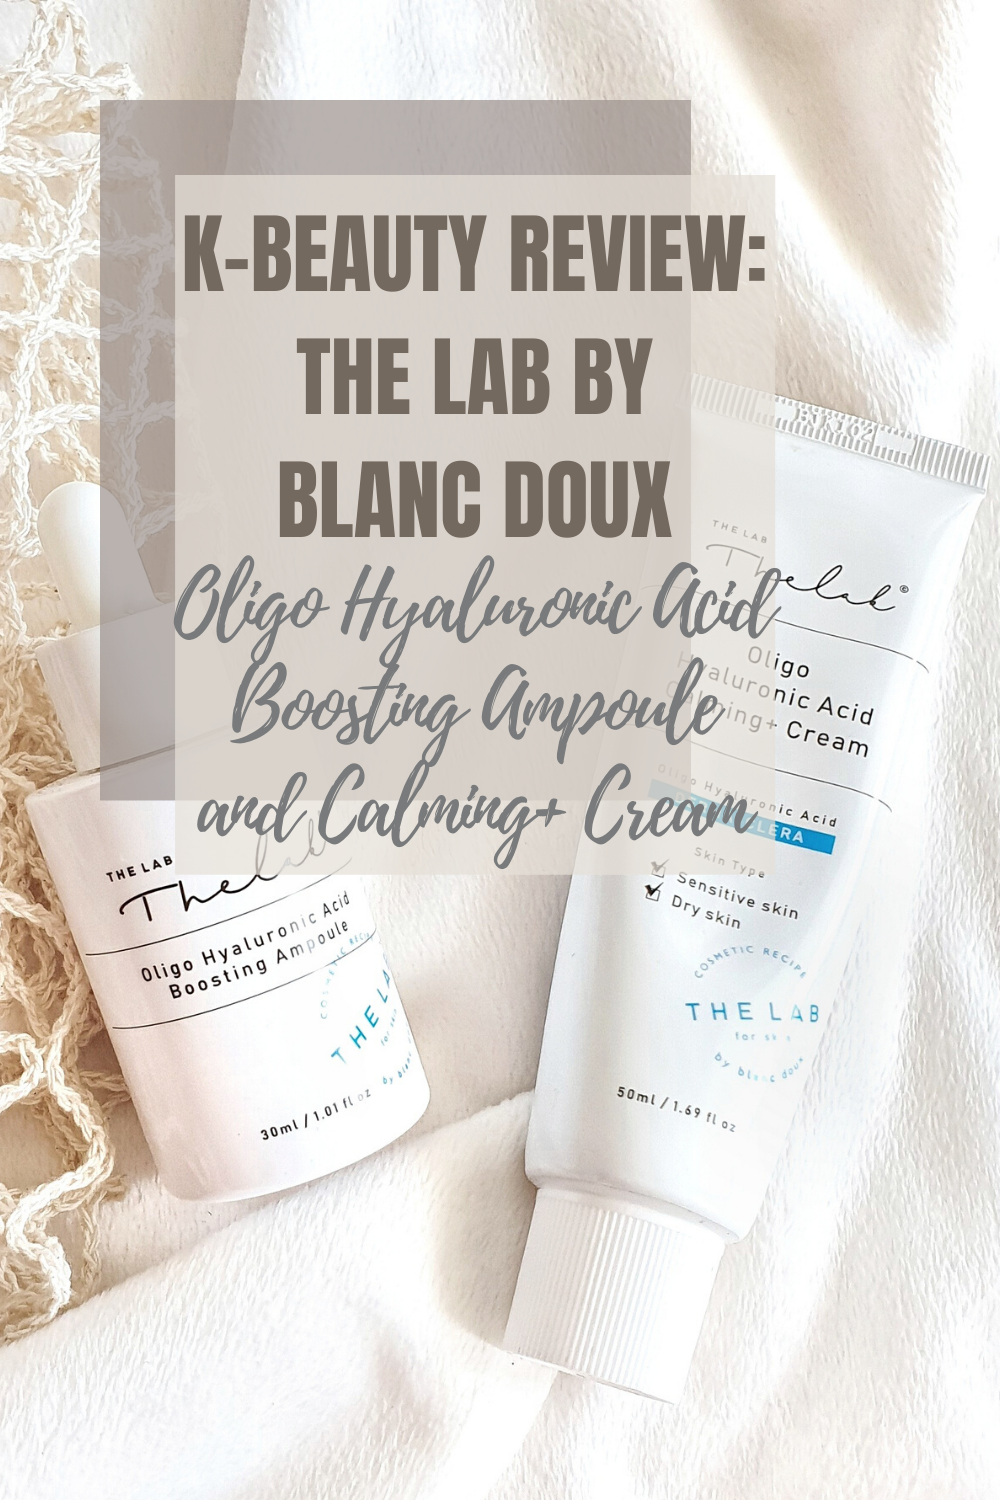 The lab by Blanc Doux Oligo Hyaluronic Acid Boosting Ampoule and Cream